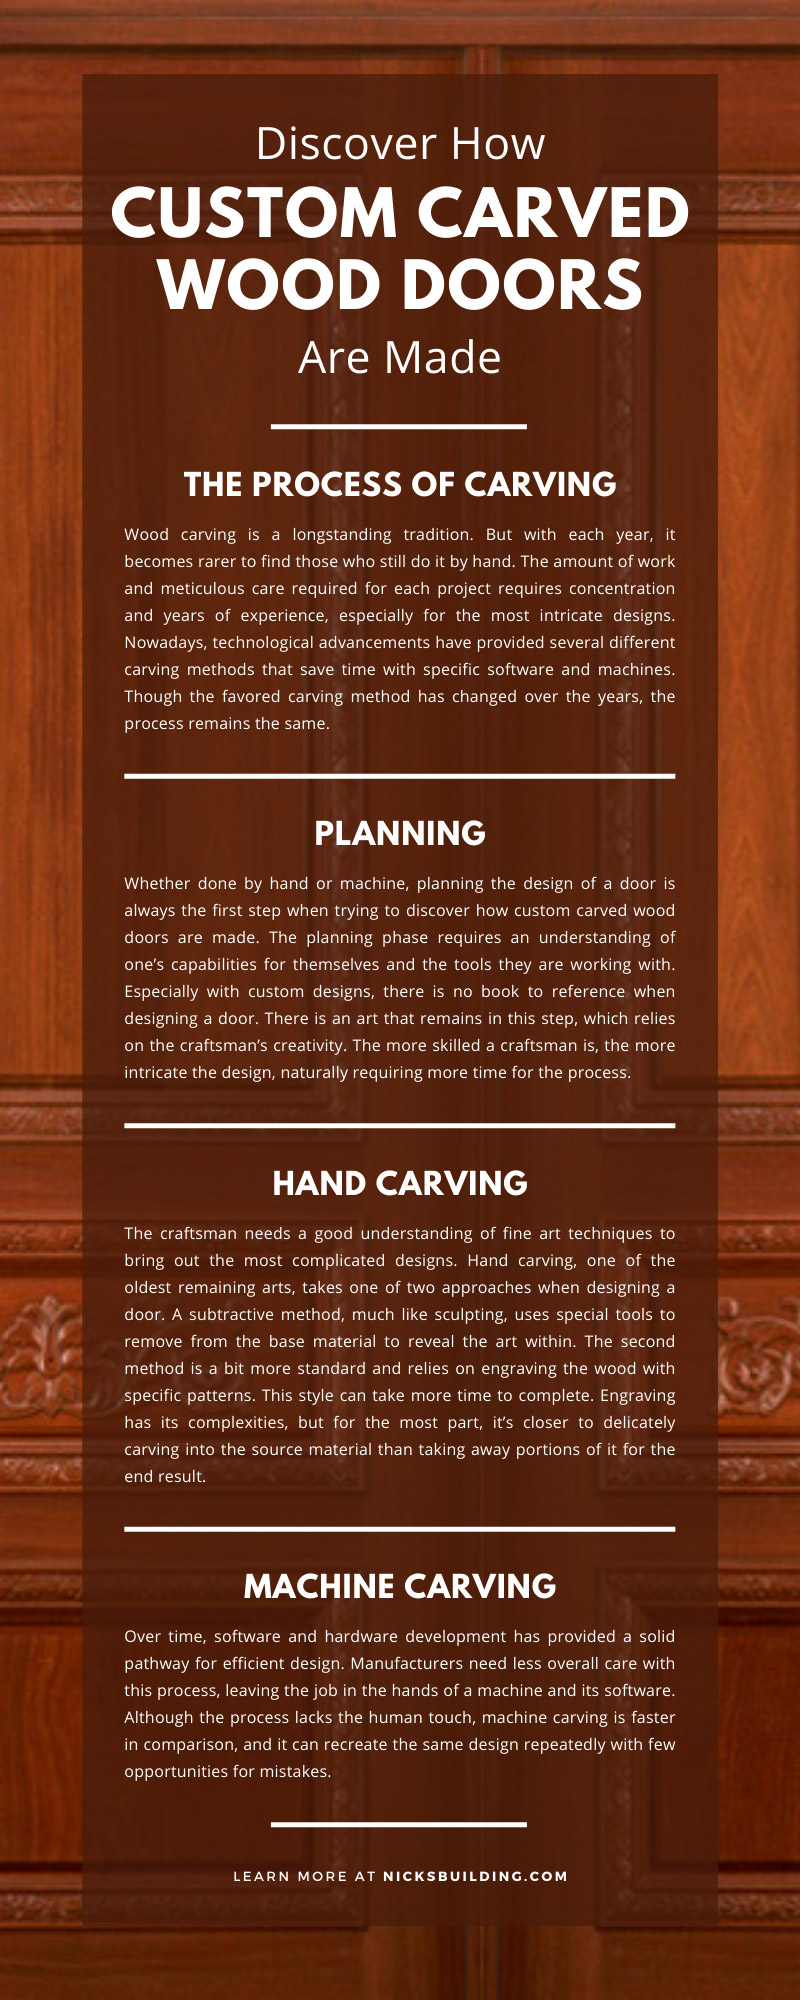 Discover How Custom Carved Wood Doors Are Made 